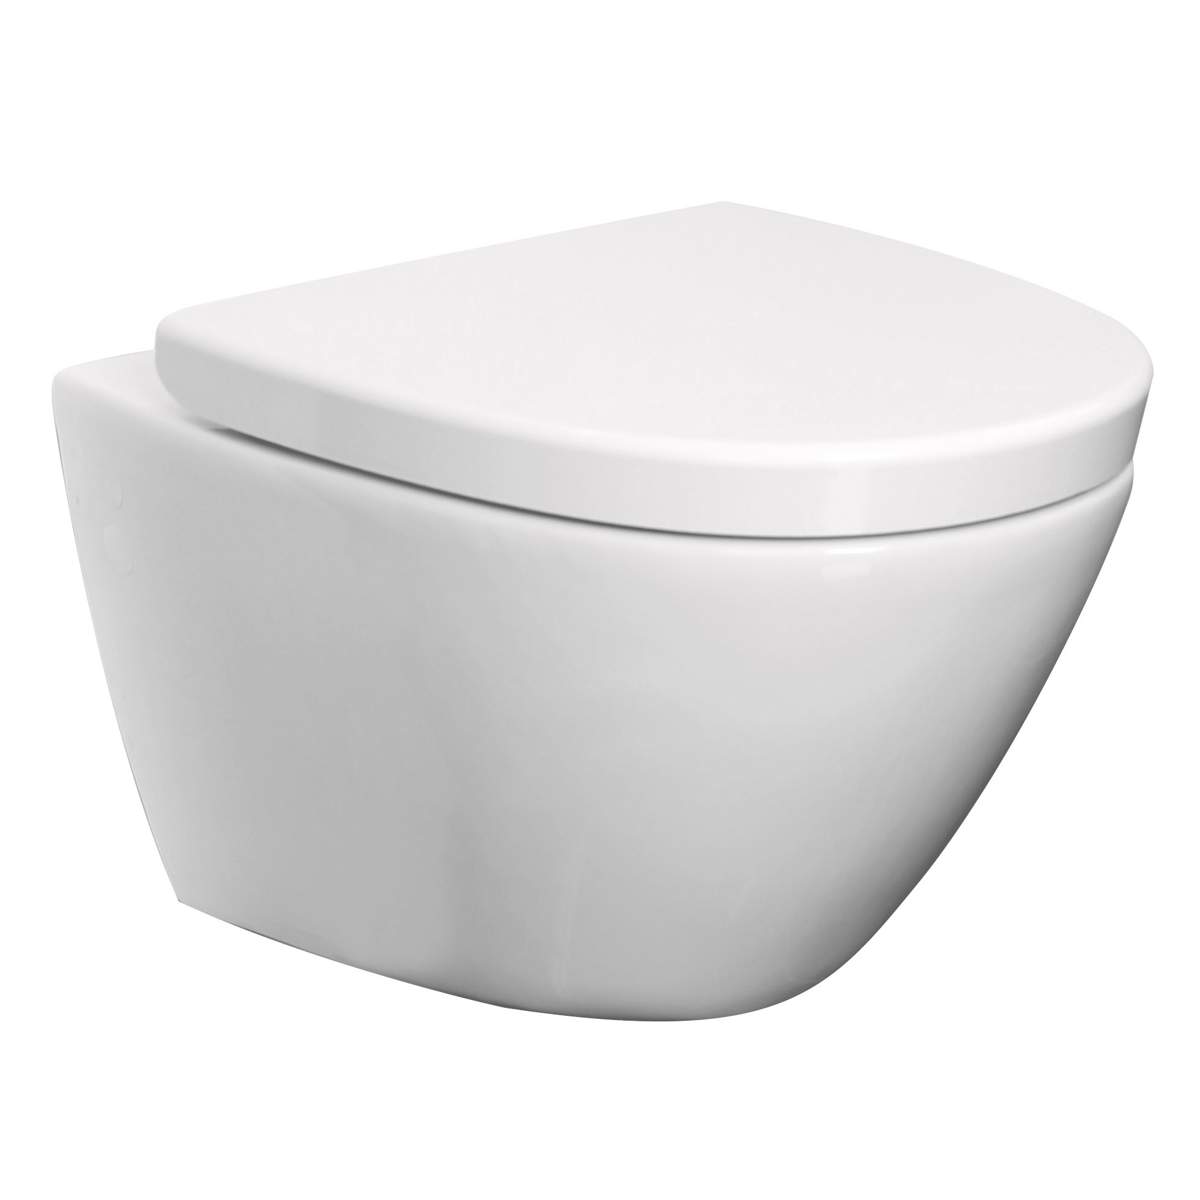 JTP Lavavo Wall Hung Rimless Toilet with Toilet Seat (LV003RL)